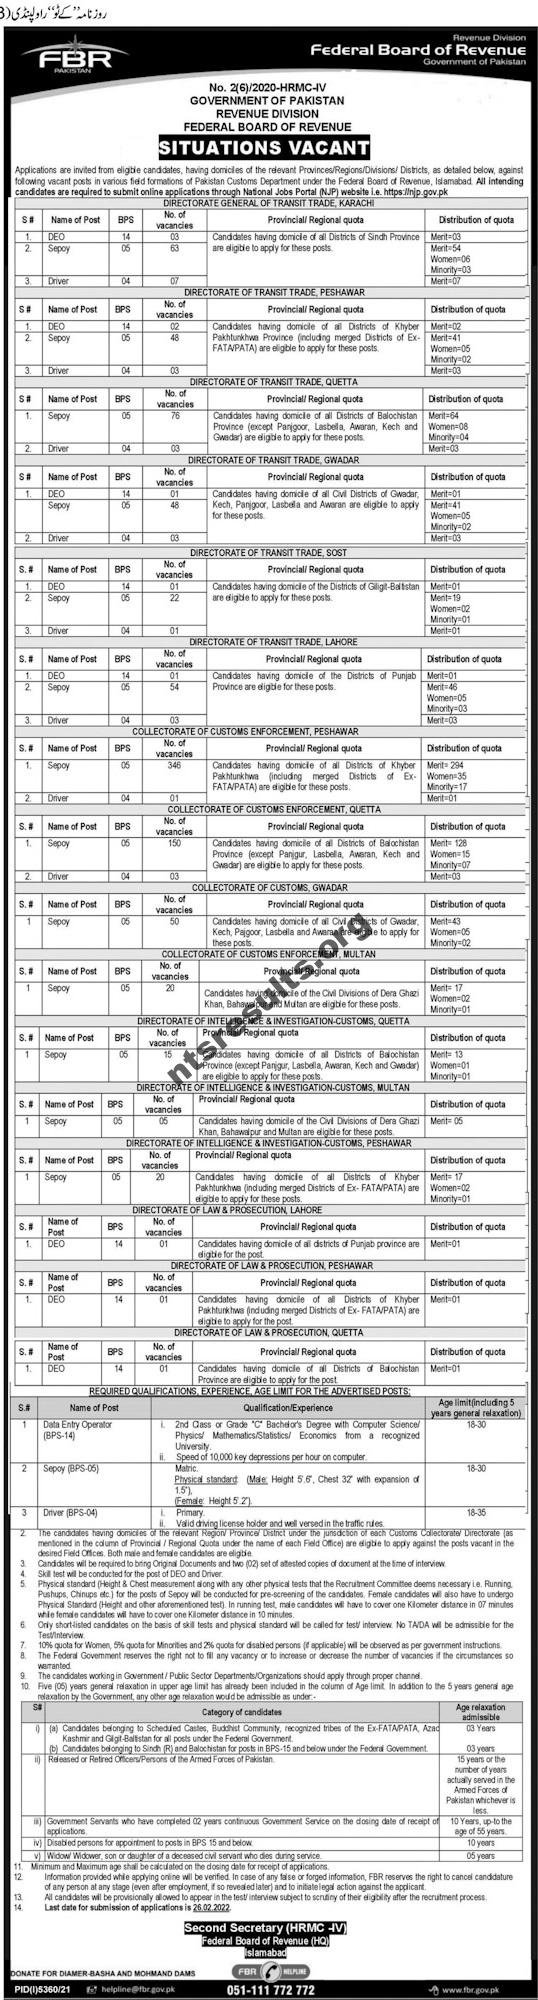 Today Latest Govt Jobs 2022 At Federal Board of Revenue